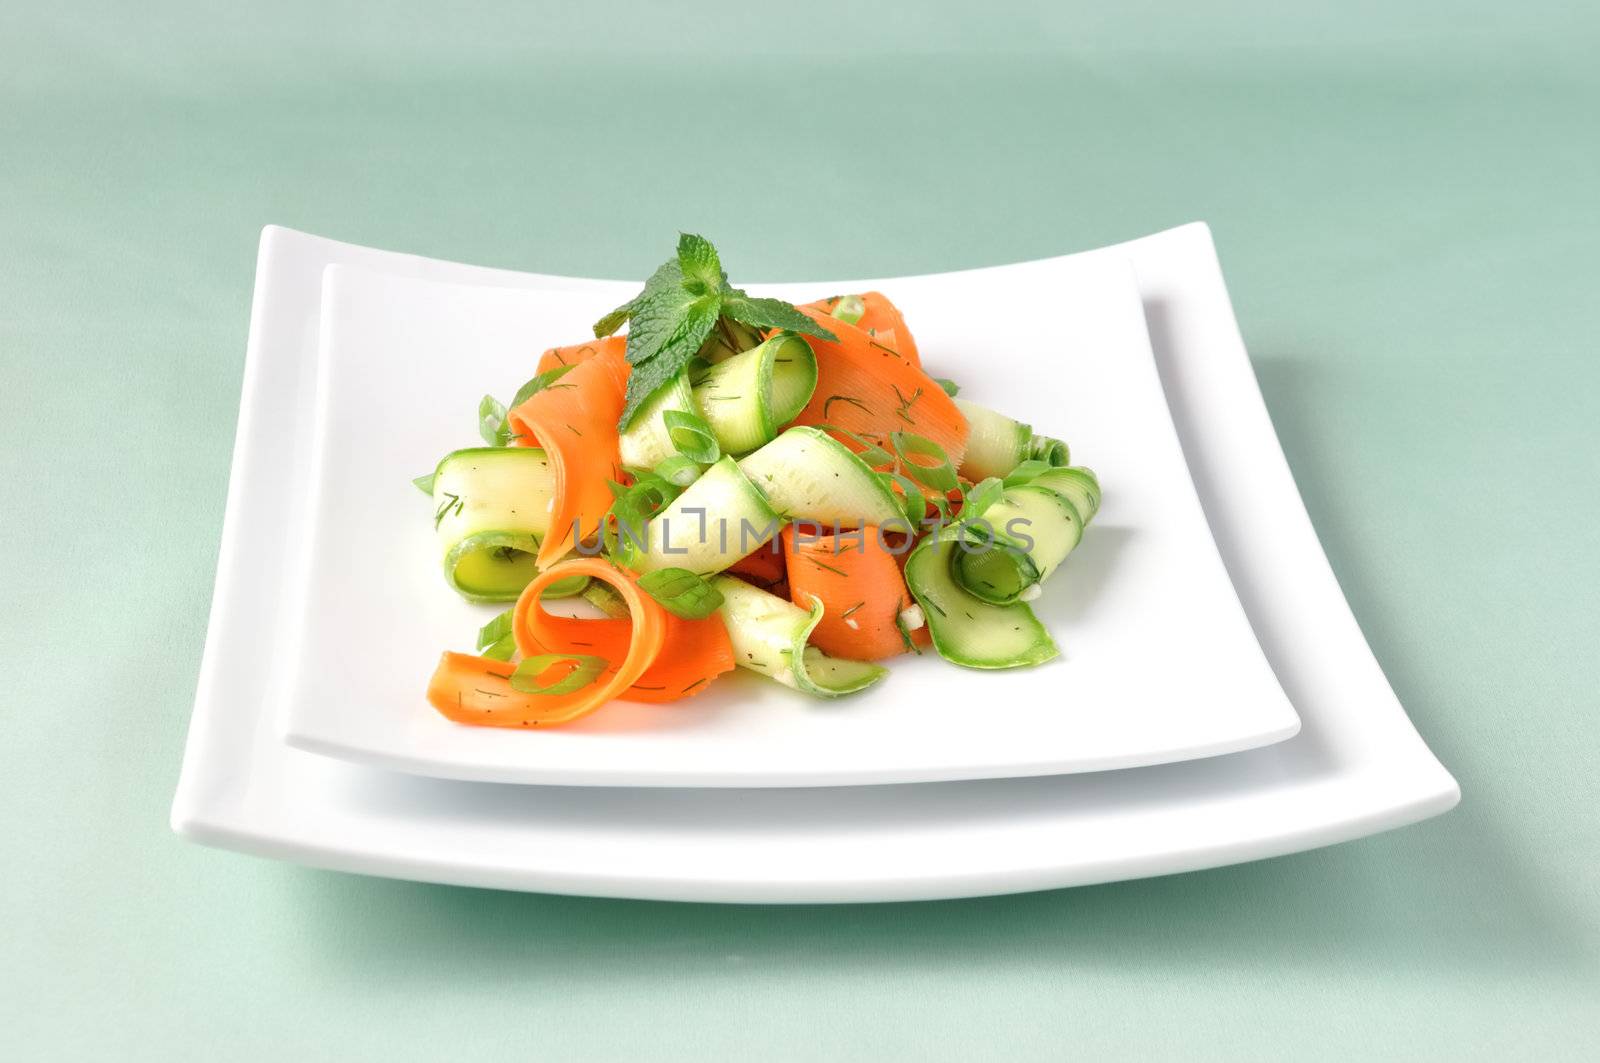 Zucchini salad with carrots by Apolonia